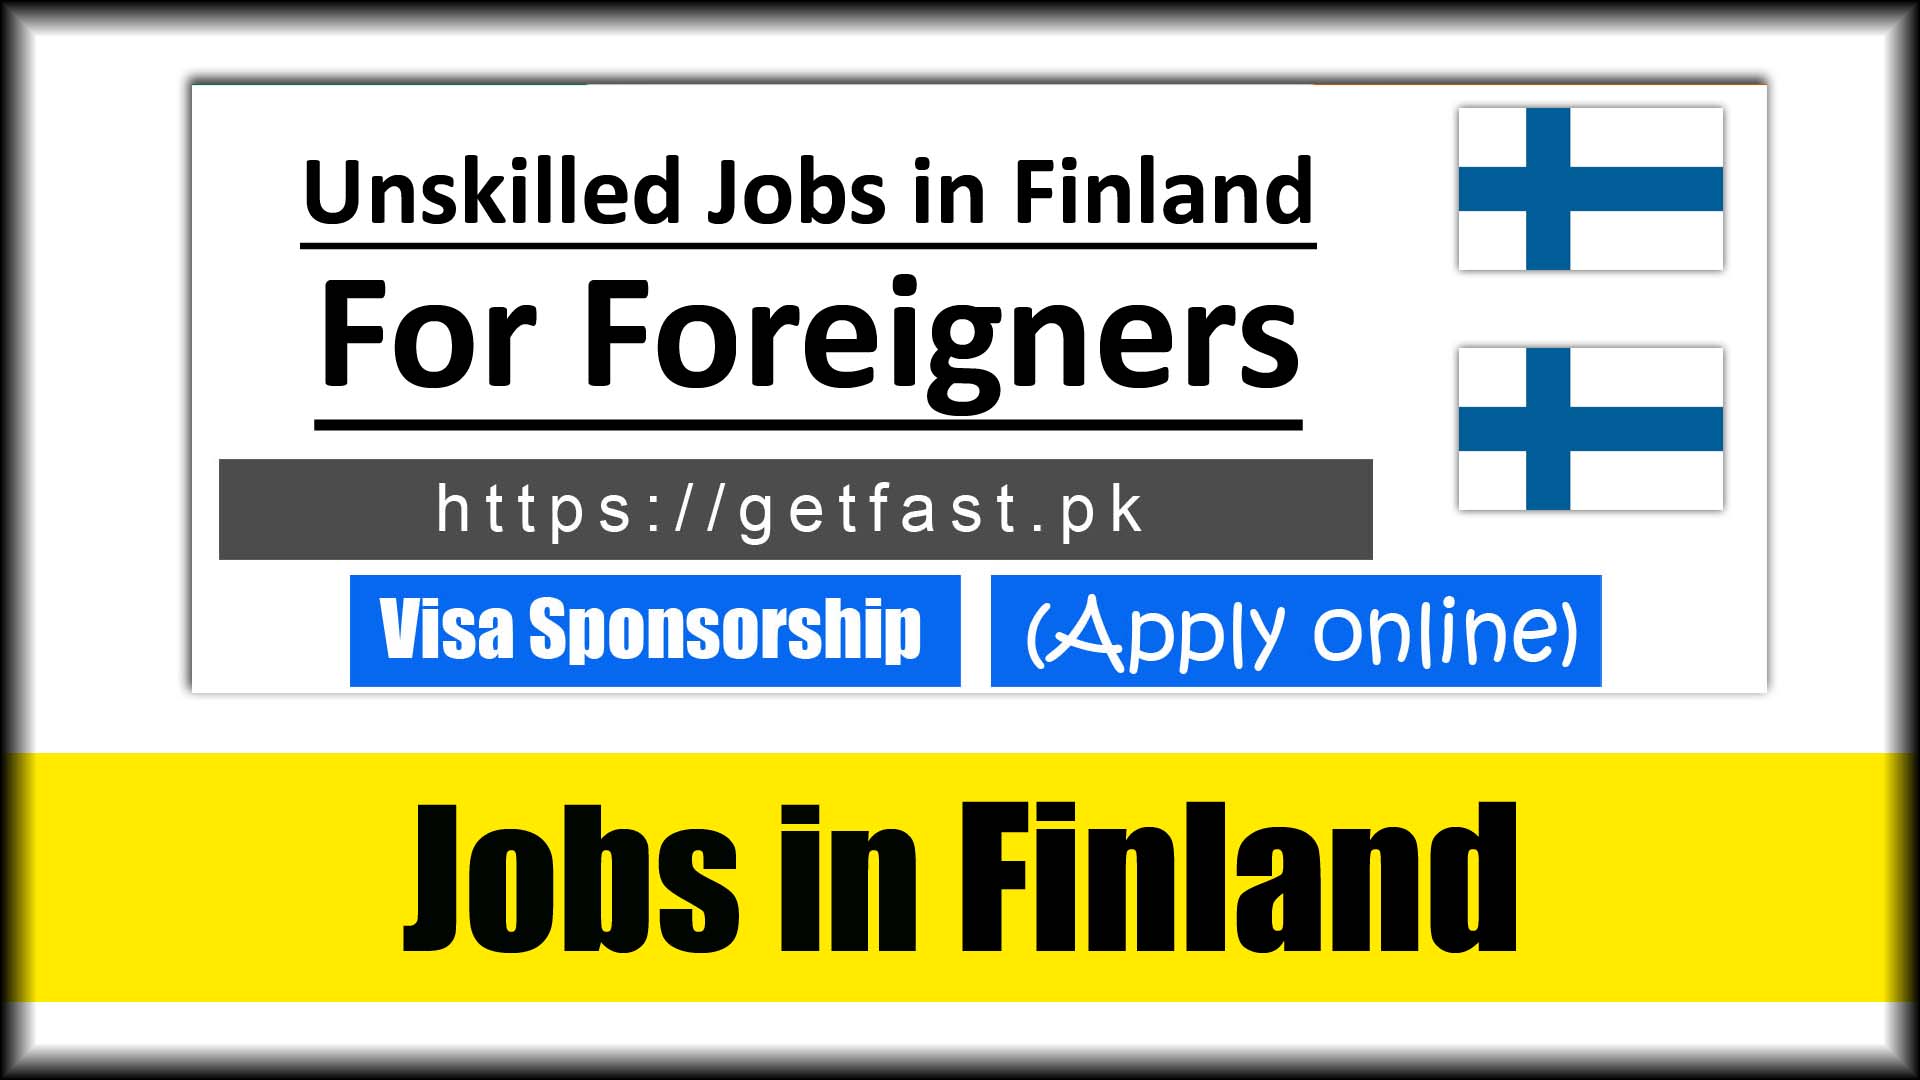 Unskilled Jobs in Finland